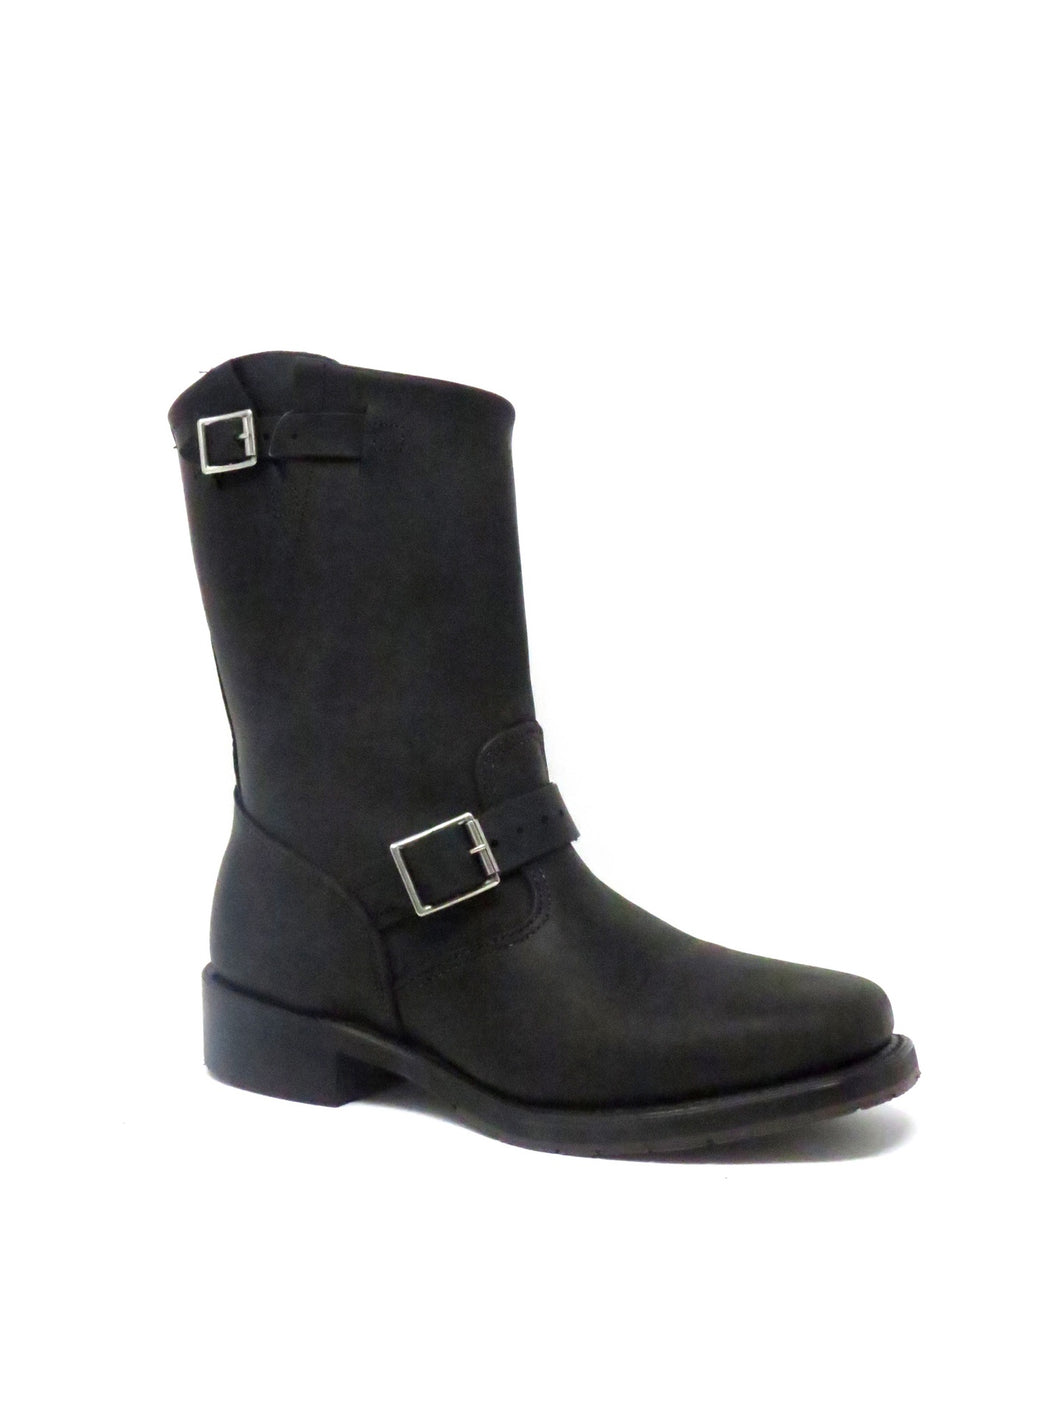 Sage Boots | 4744 | Boot | Black